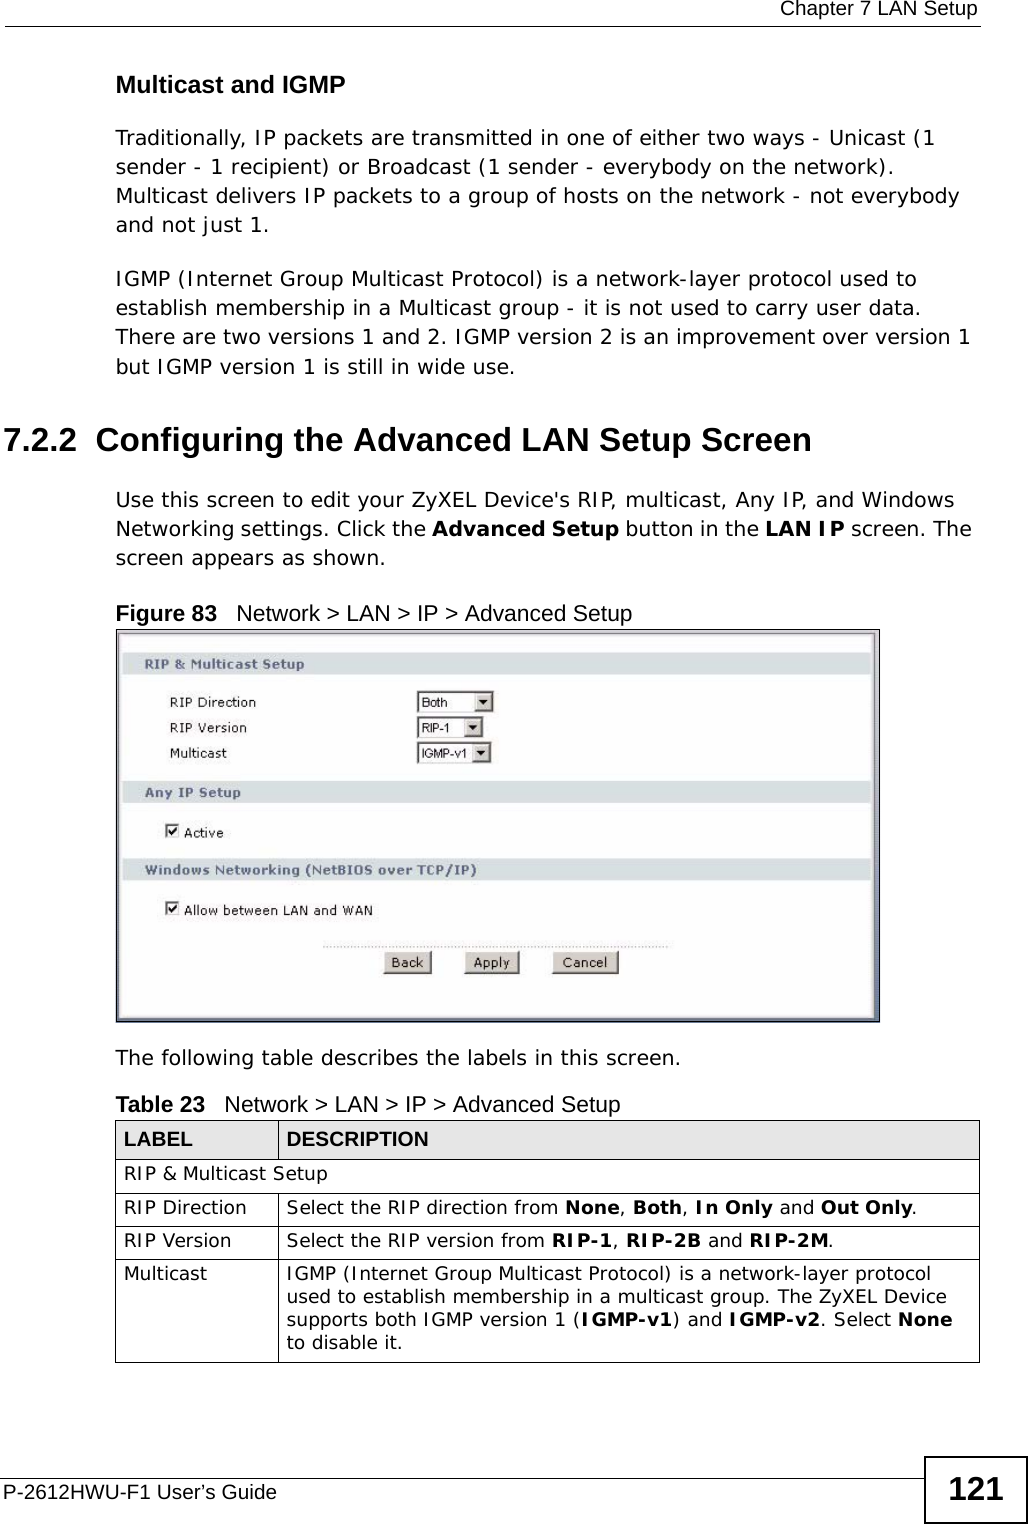  Chapter 7 LAN SetupP-2612HWU-F1 User’s Guide 121Multicast and IGMPTraditionally, IP packets are transmitted in one of either two ways - Unicast (1 sender - 1 recipient) or Broadcast (1 sender - everybody on the network). Multicast delivers IP packets to a group of hosts on the network - not everybody and not just 1.IGMP (Internet Group Multicast Protocol) is a network-layer protocol used to establish membership in a Multicast group - it is not used to carry user data. There are two versions 1 and 2. IGMP version 2 is an improvement over version 1 but IGMP version 1 is still in wide use.7.2.2  Configuring the Advanced LAN Setup Screen Use this screen to edit your ZyXEL Device&apos;s RIP, multicast, Any IP, and Windows Networking settings. Click the Advanced Setup button in the LAN IP screen. The screen appears as shown.Figure 83   Network &gt; LAN &gt; IP &gt; Advanced SetupThe following table describes the labels in this screen.  Table 23   Network &gt; LAN &gt; IP &gt; Advanced SetupLABEL DESCRIPTIONRIP &amp; Multicast SetupRIP Direction Select the RIP direction from None, Both, In Only and Out Only.RIP Version Select the RIP version from RIP-1, RIP-2B and RIP-2M.Multicast IGMP (Internet Group Multicast Protocol) is a network-layer protocol used to establish membership in a multicast group. The ZyXEL Device supports both IGMP version 1 (IGMP-v1) and IGMP-v2. Select None to disable it.